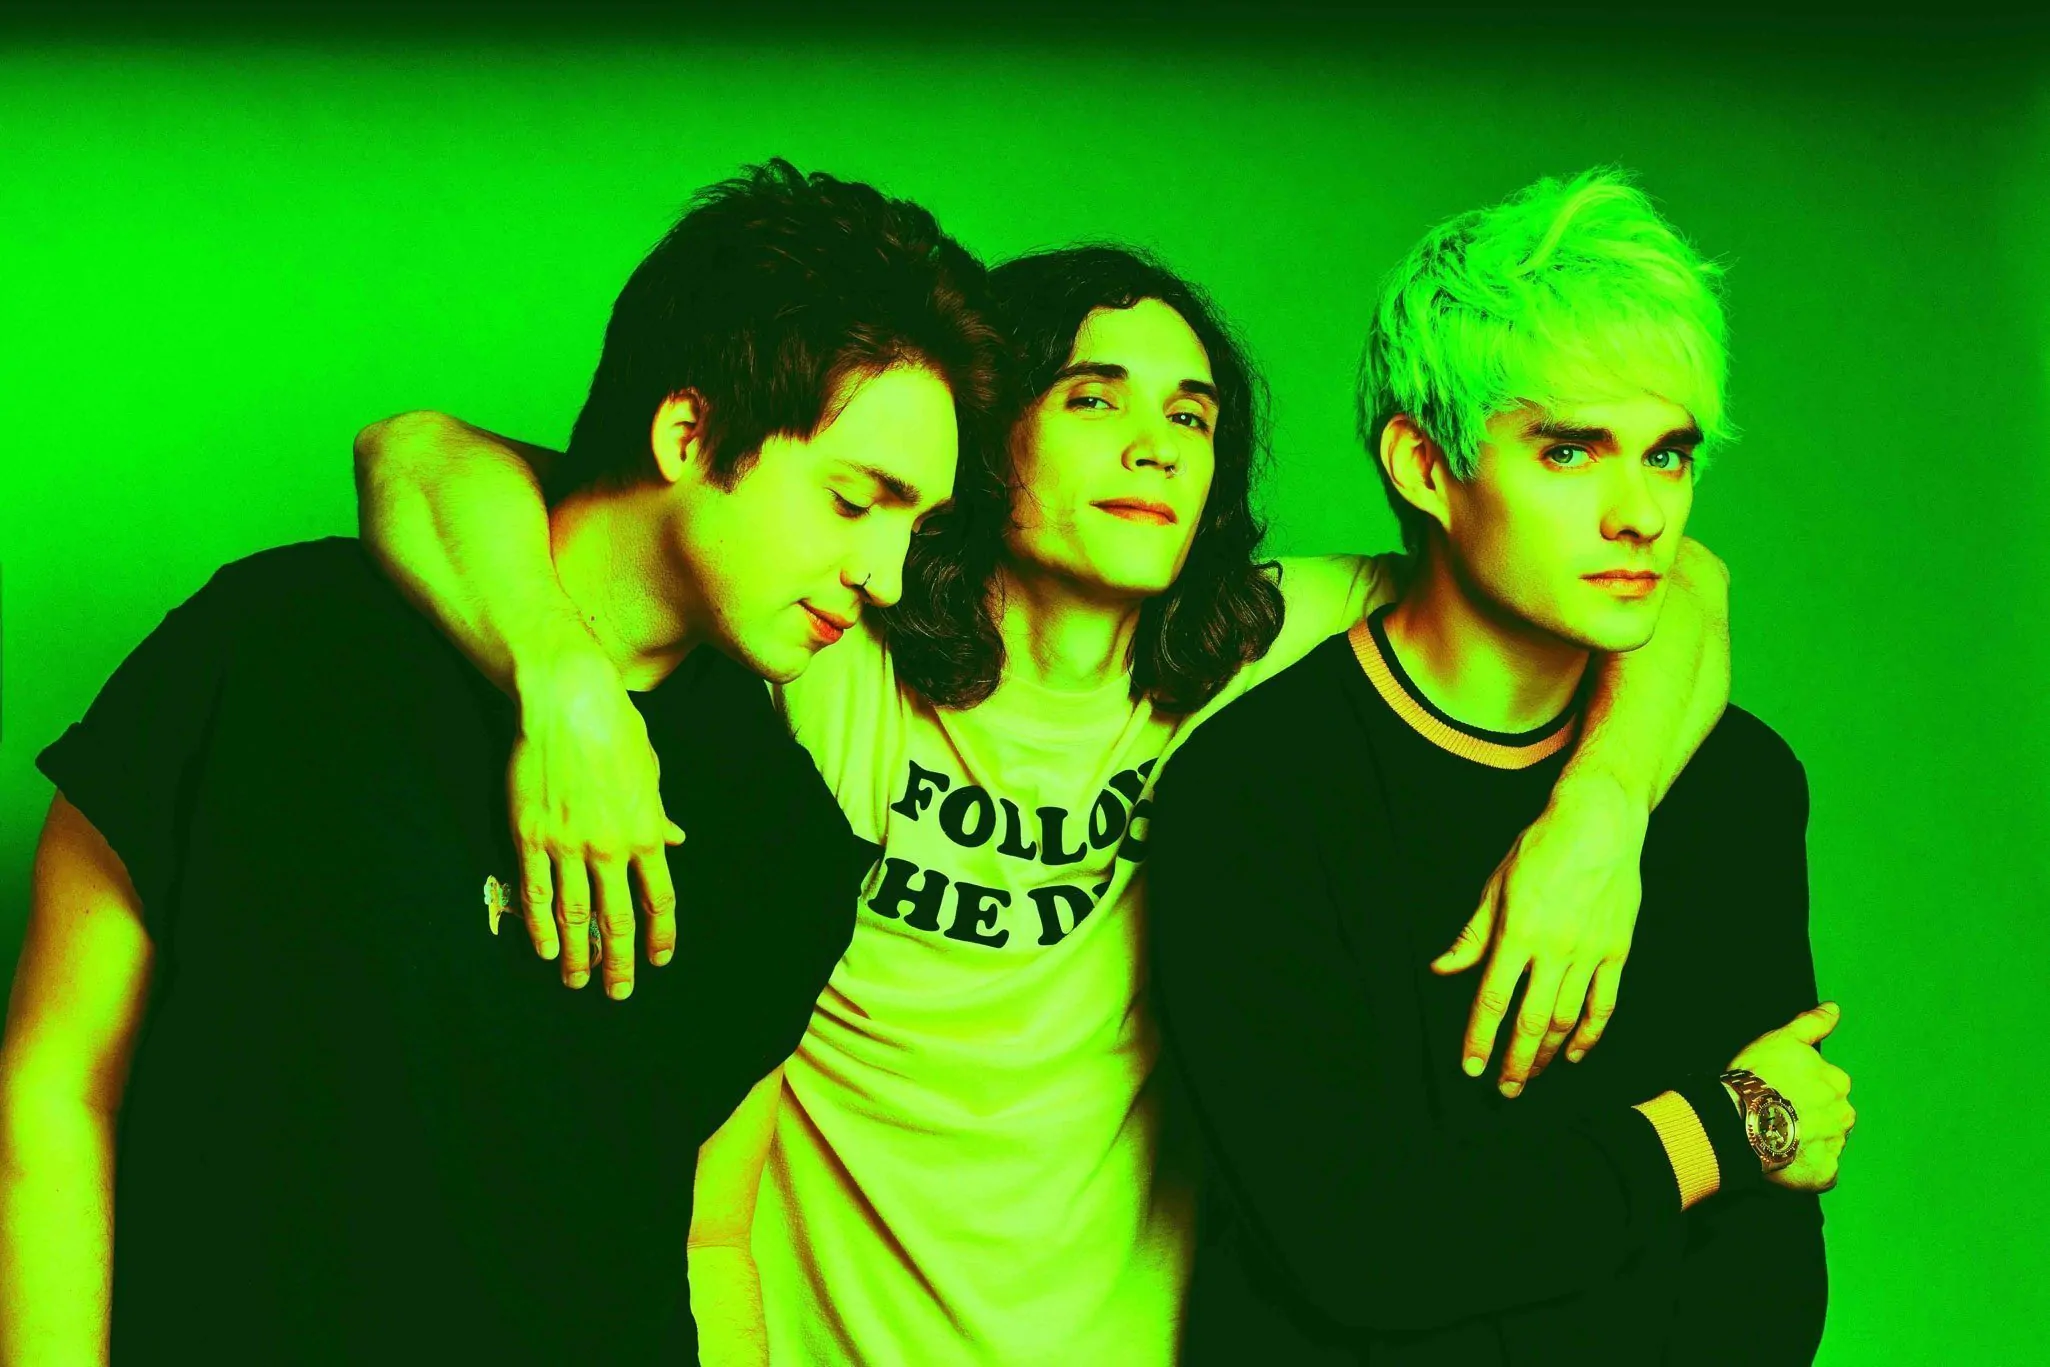 US pop-punk trio WATERPARKS announce headline Belfast show at the Waterfront Studio, Saturday 25th January